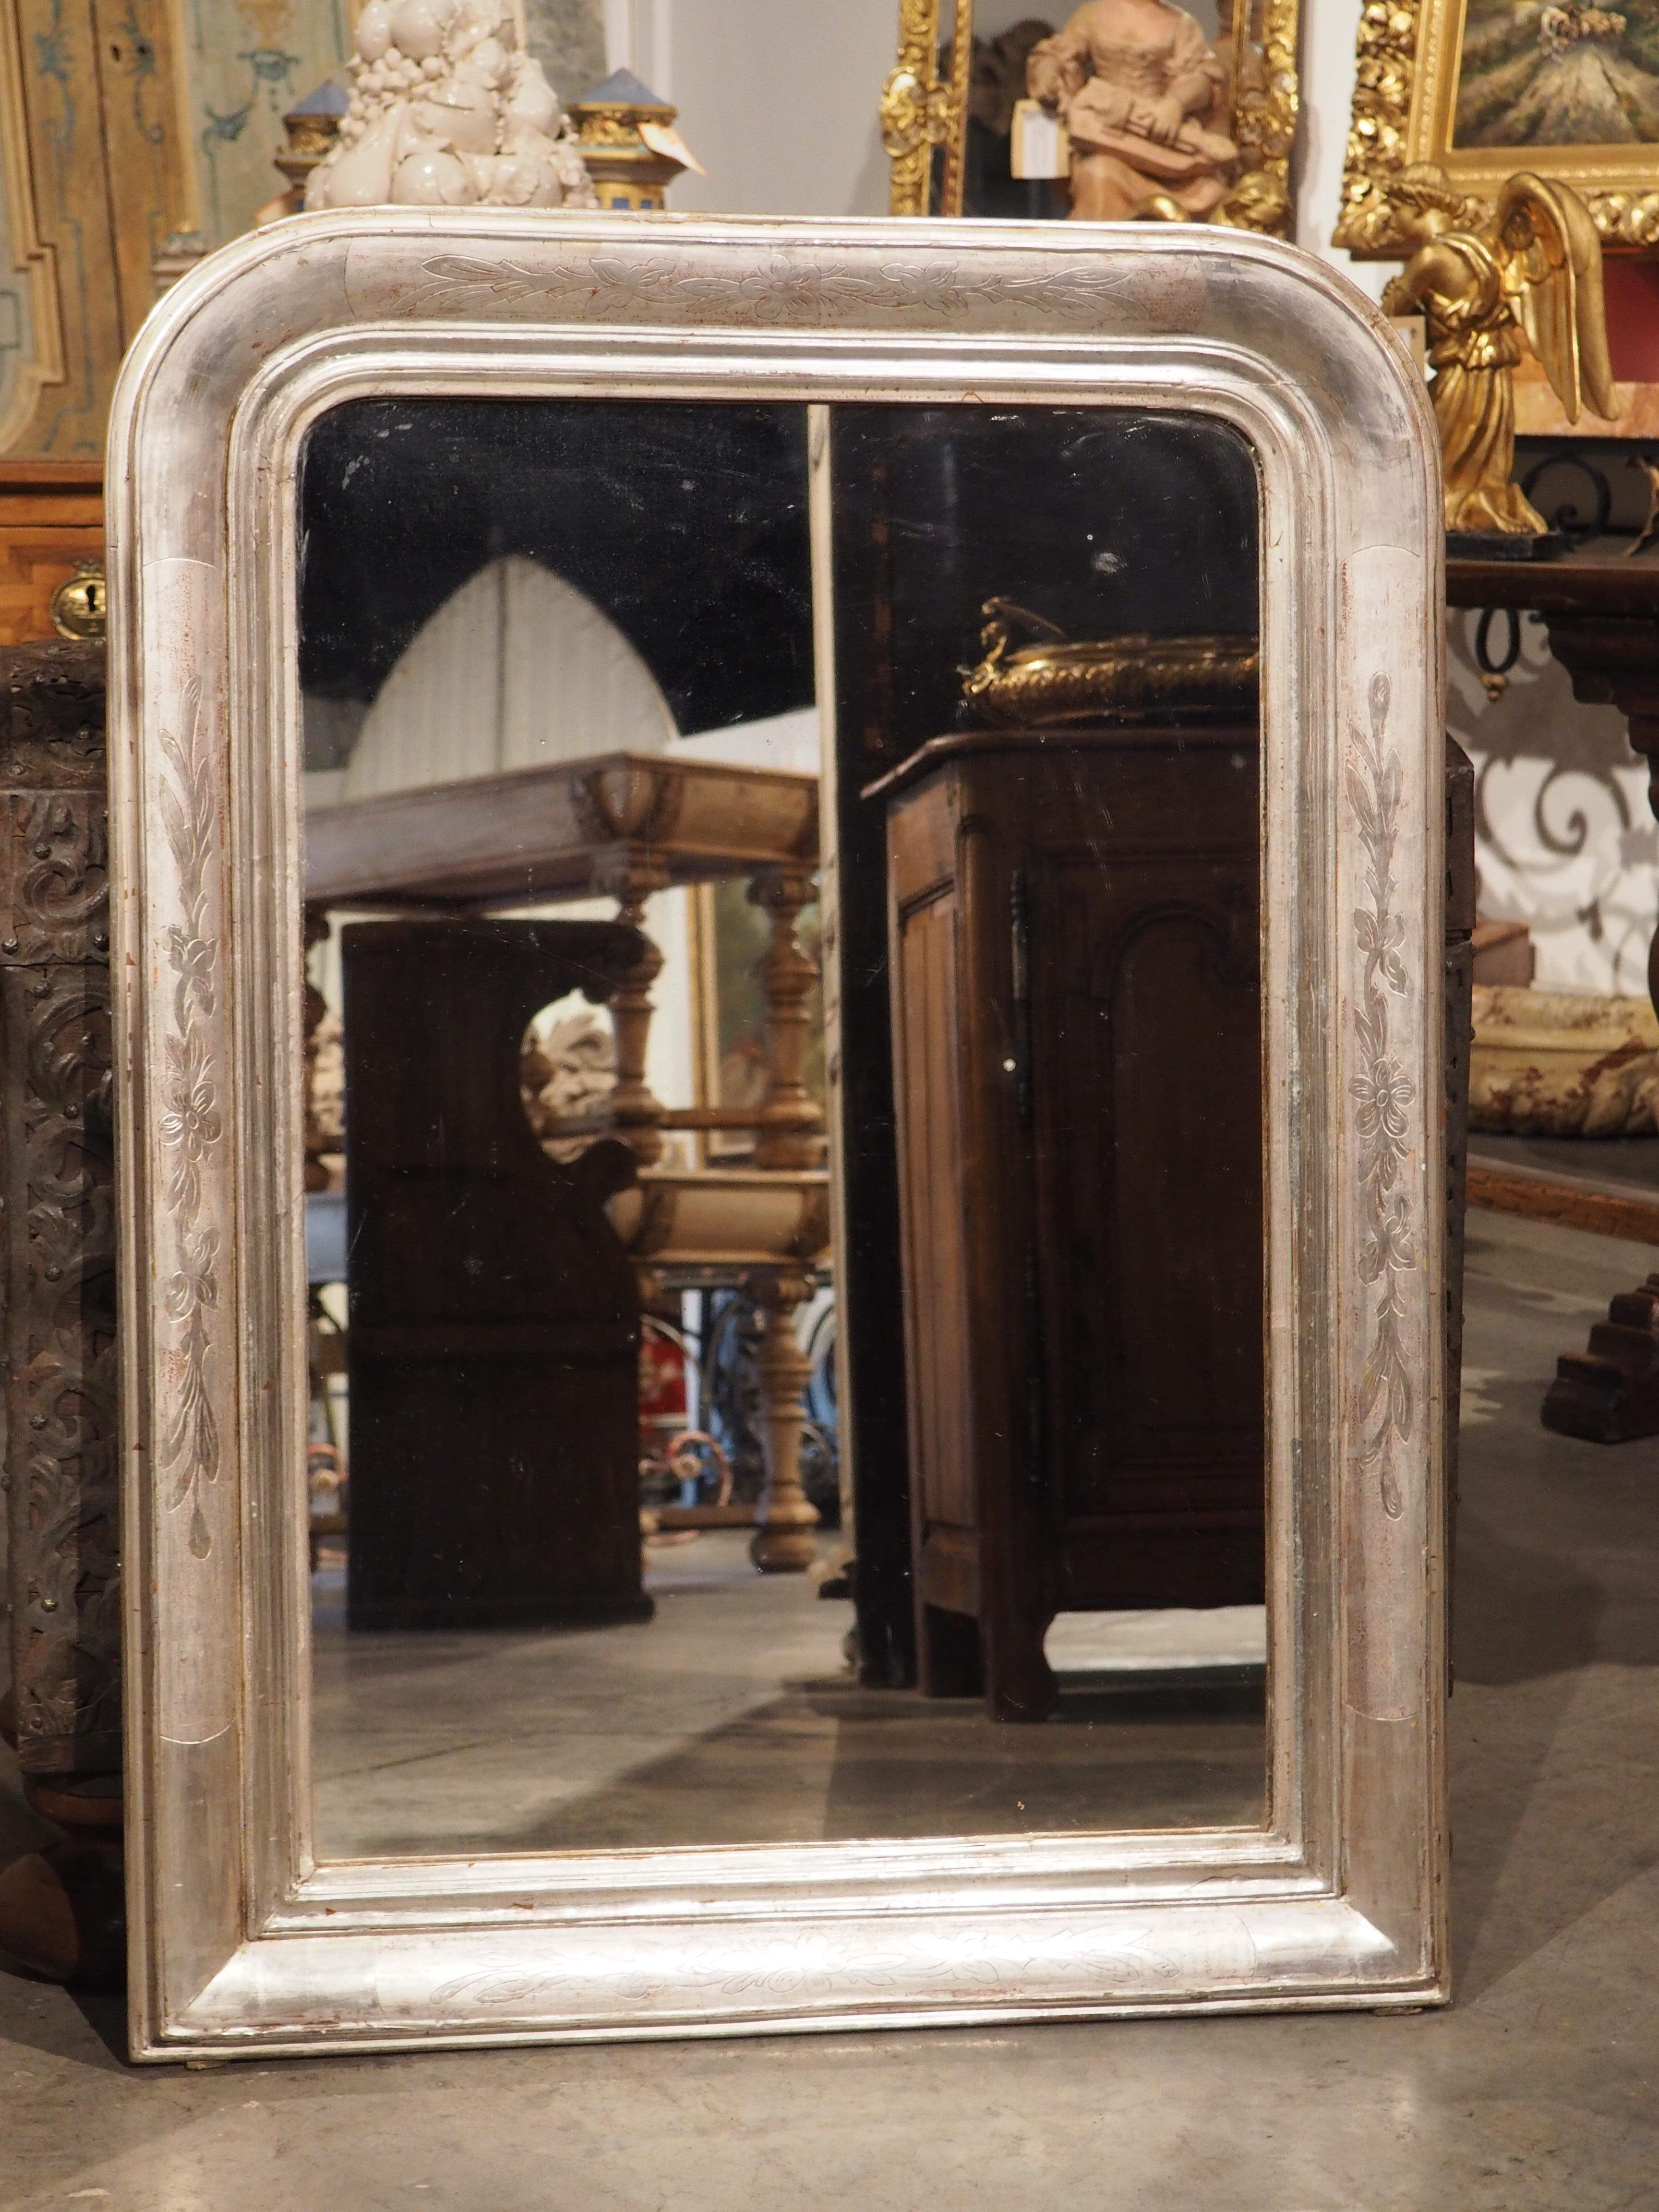 When it comes to timeless style, nothing quite beats an antique mirror like a Louis Philippe. This classic design has graced homes since the 1800s, and can be used in virtually any room today.

With its rounded shoulders and wide frame, this